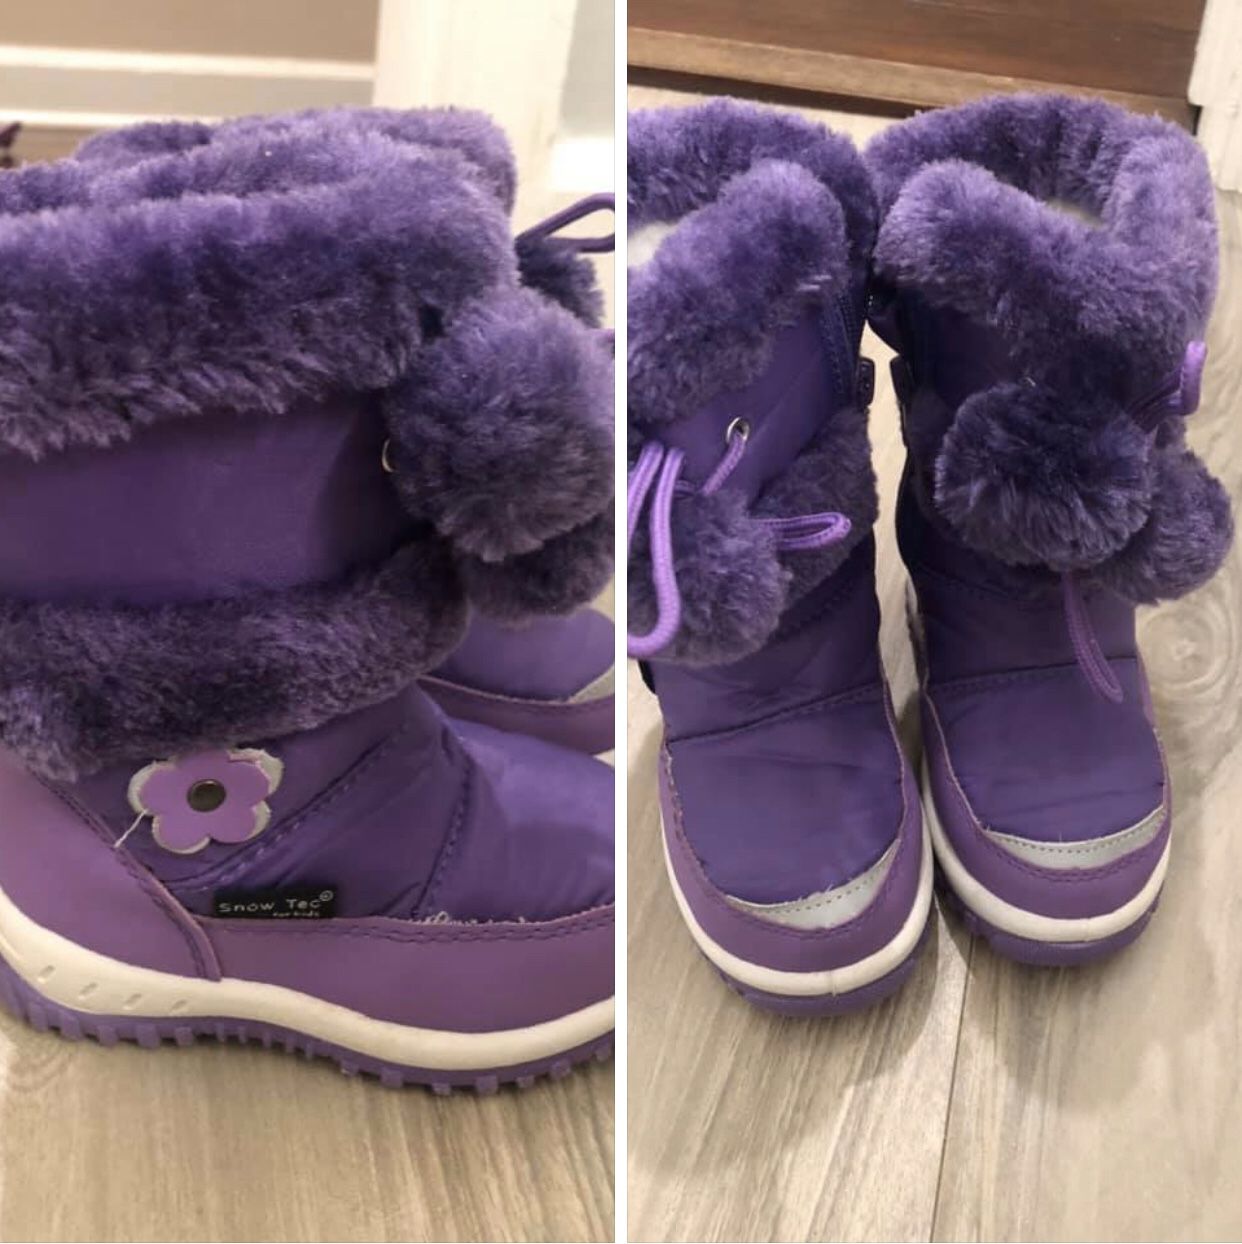 Toddler size 7 snow boots